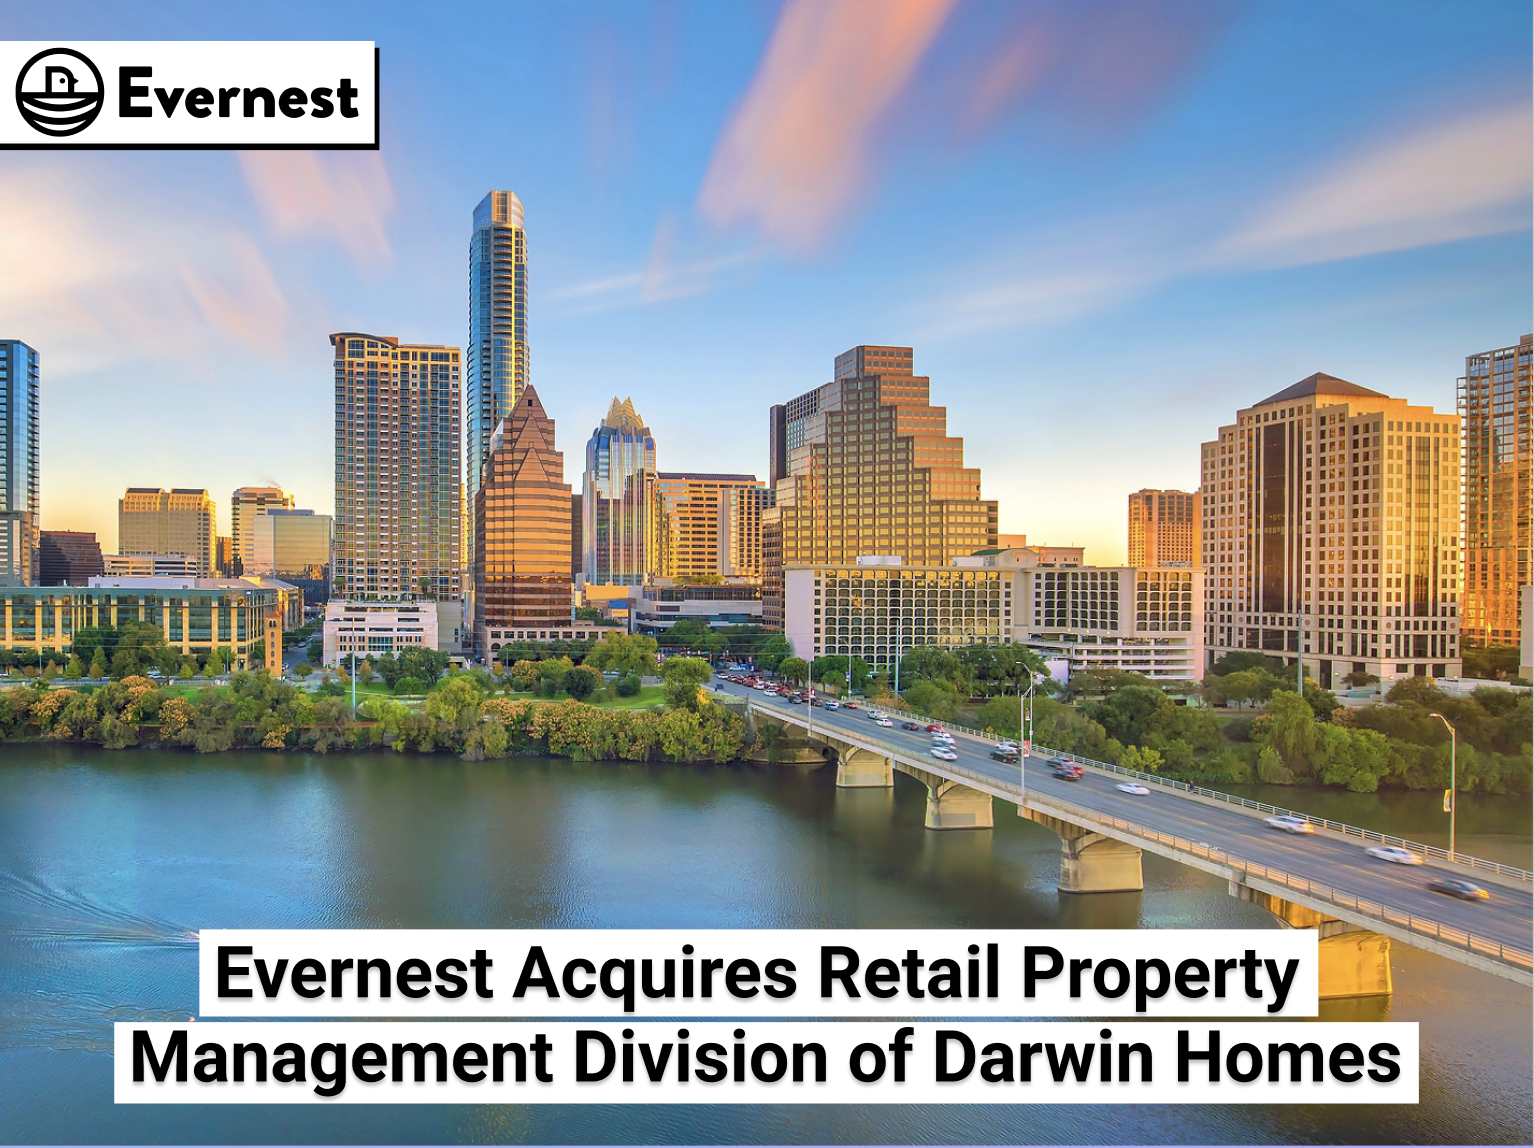 Evernest Acquires Retail Property Management Division of Darwin Homes